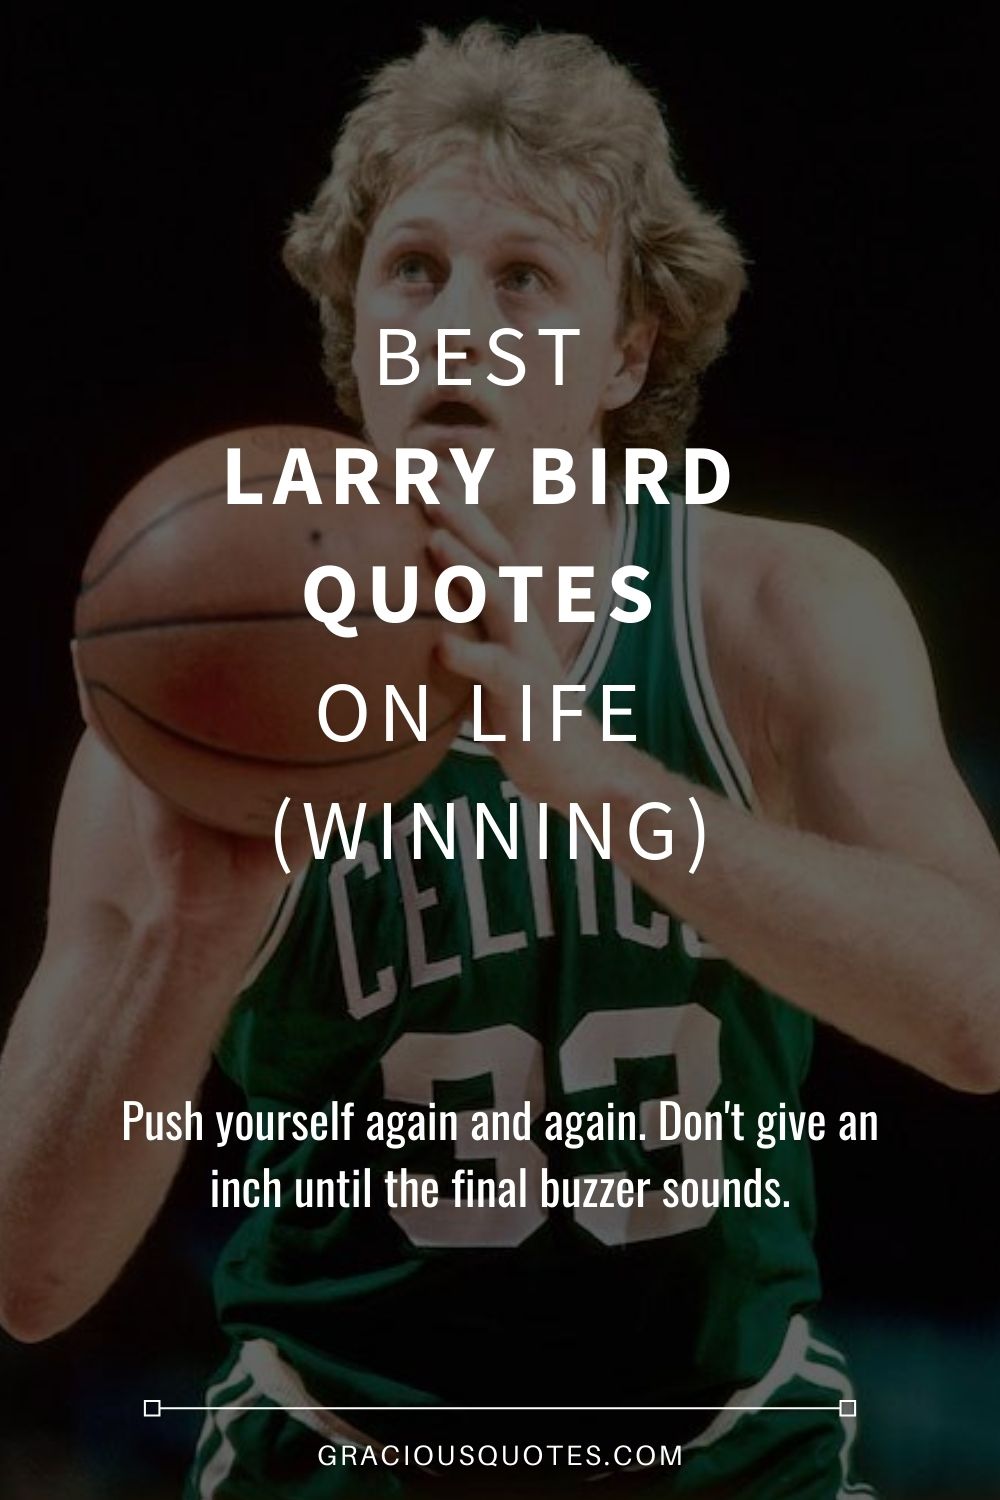 Best Larry Bird Quotes on Life (WINNING) - Gracious Quotes